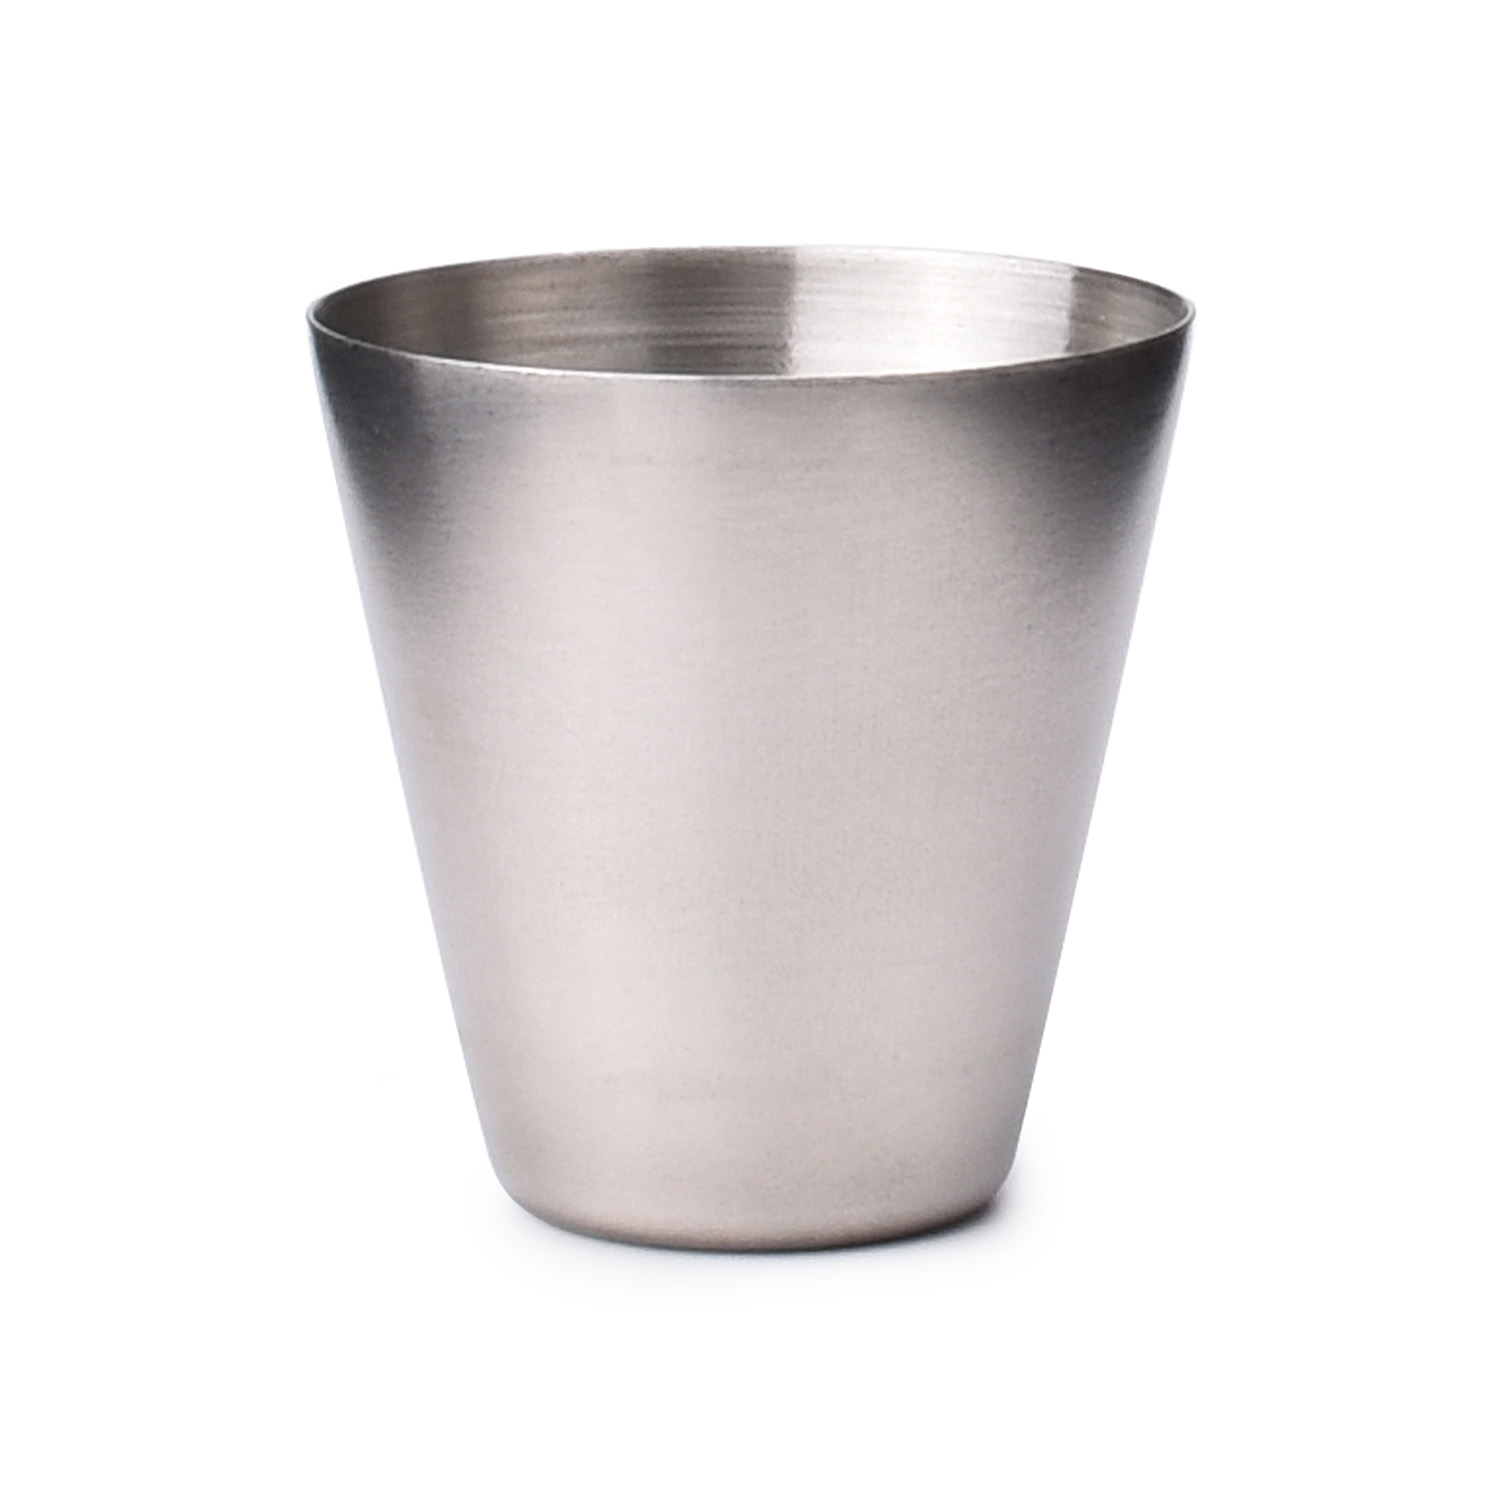 Wholesale Stainless Steel Tumblers, Tumblers In Bulk| Insulated Tumbler ...